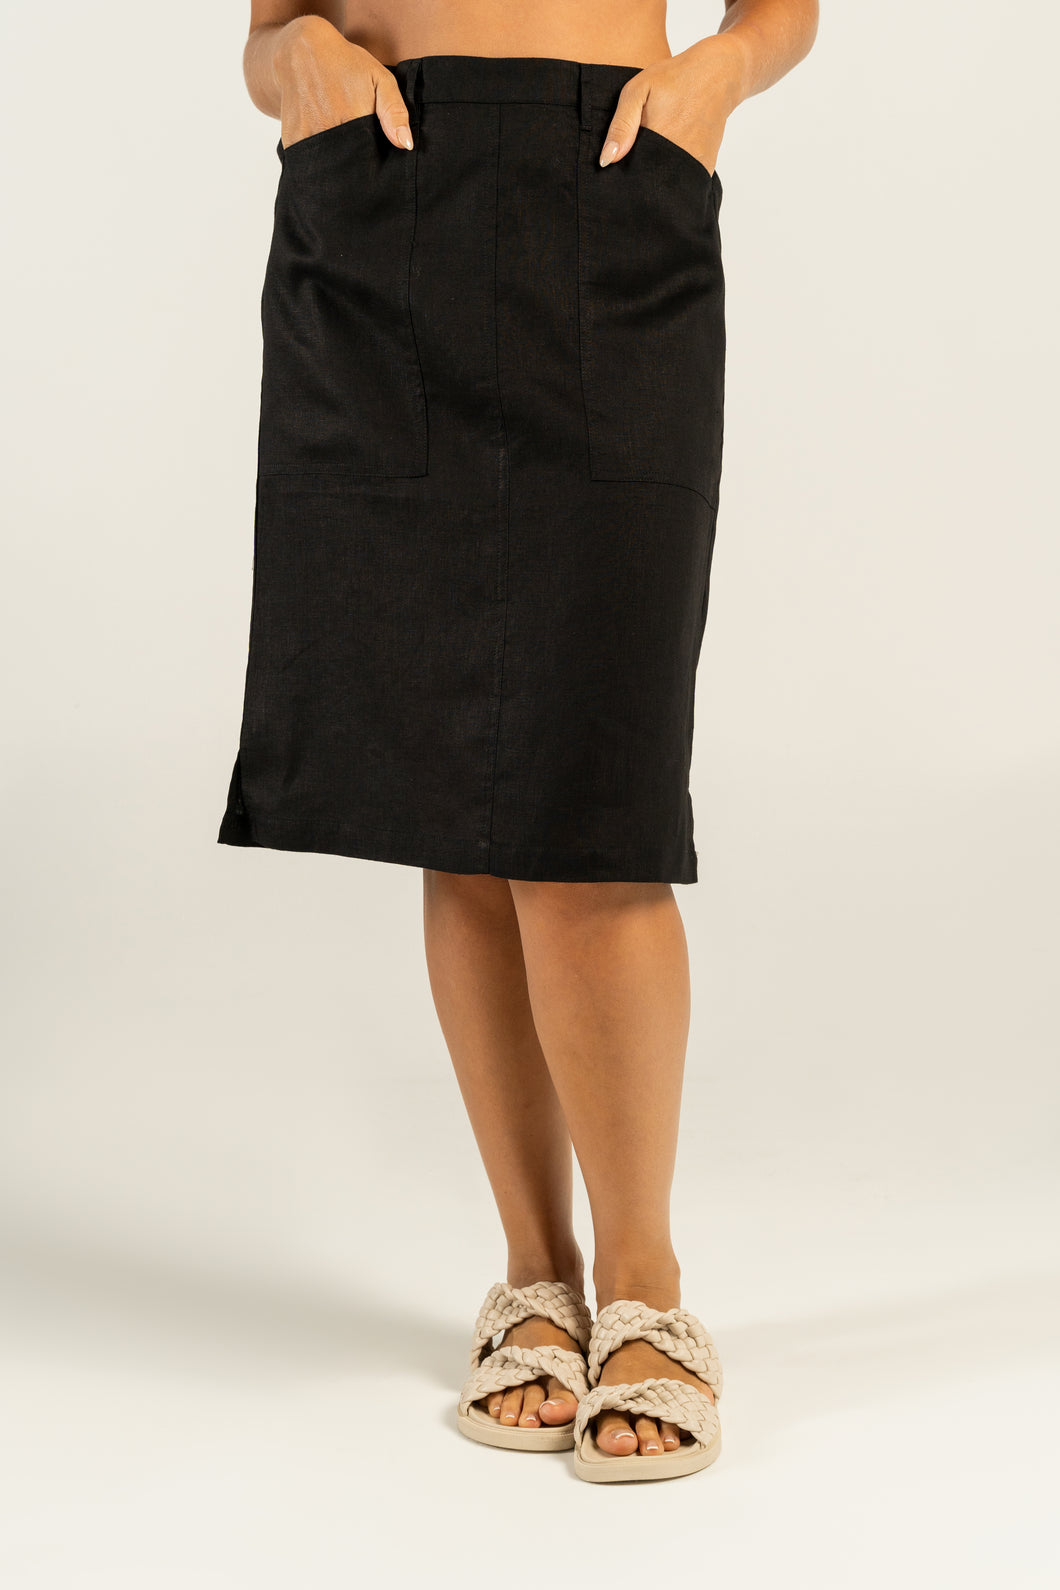 See Saw  Black Linen Straight Skirt With Pockets - Sizes:  8  10  12  18